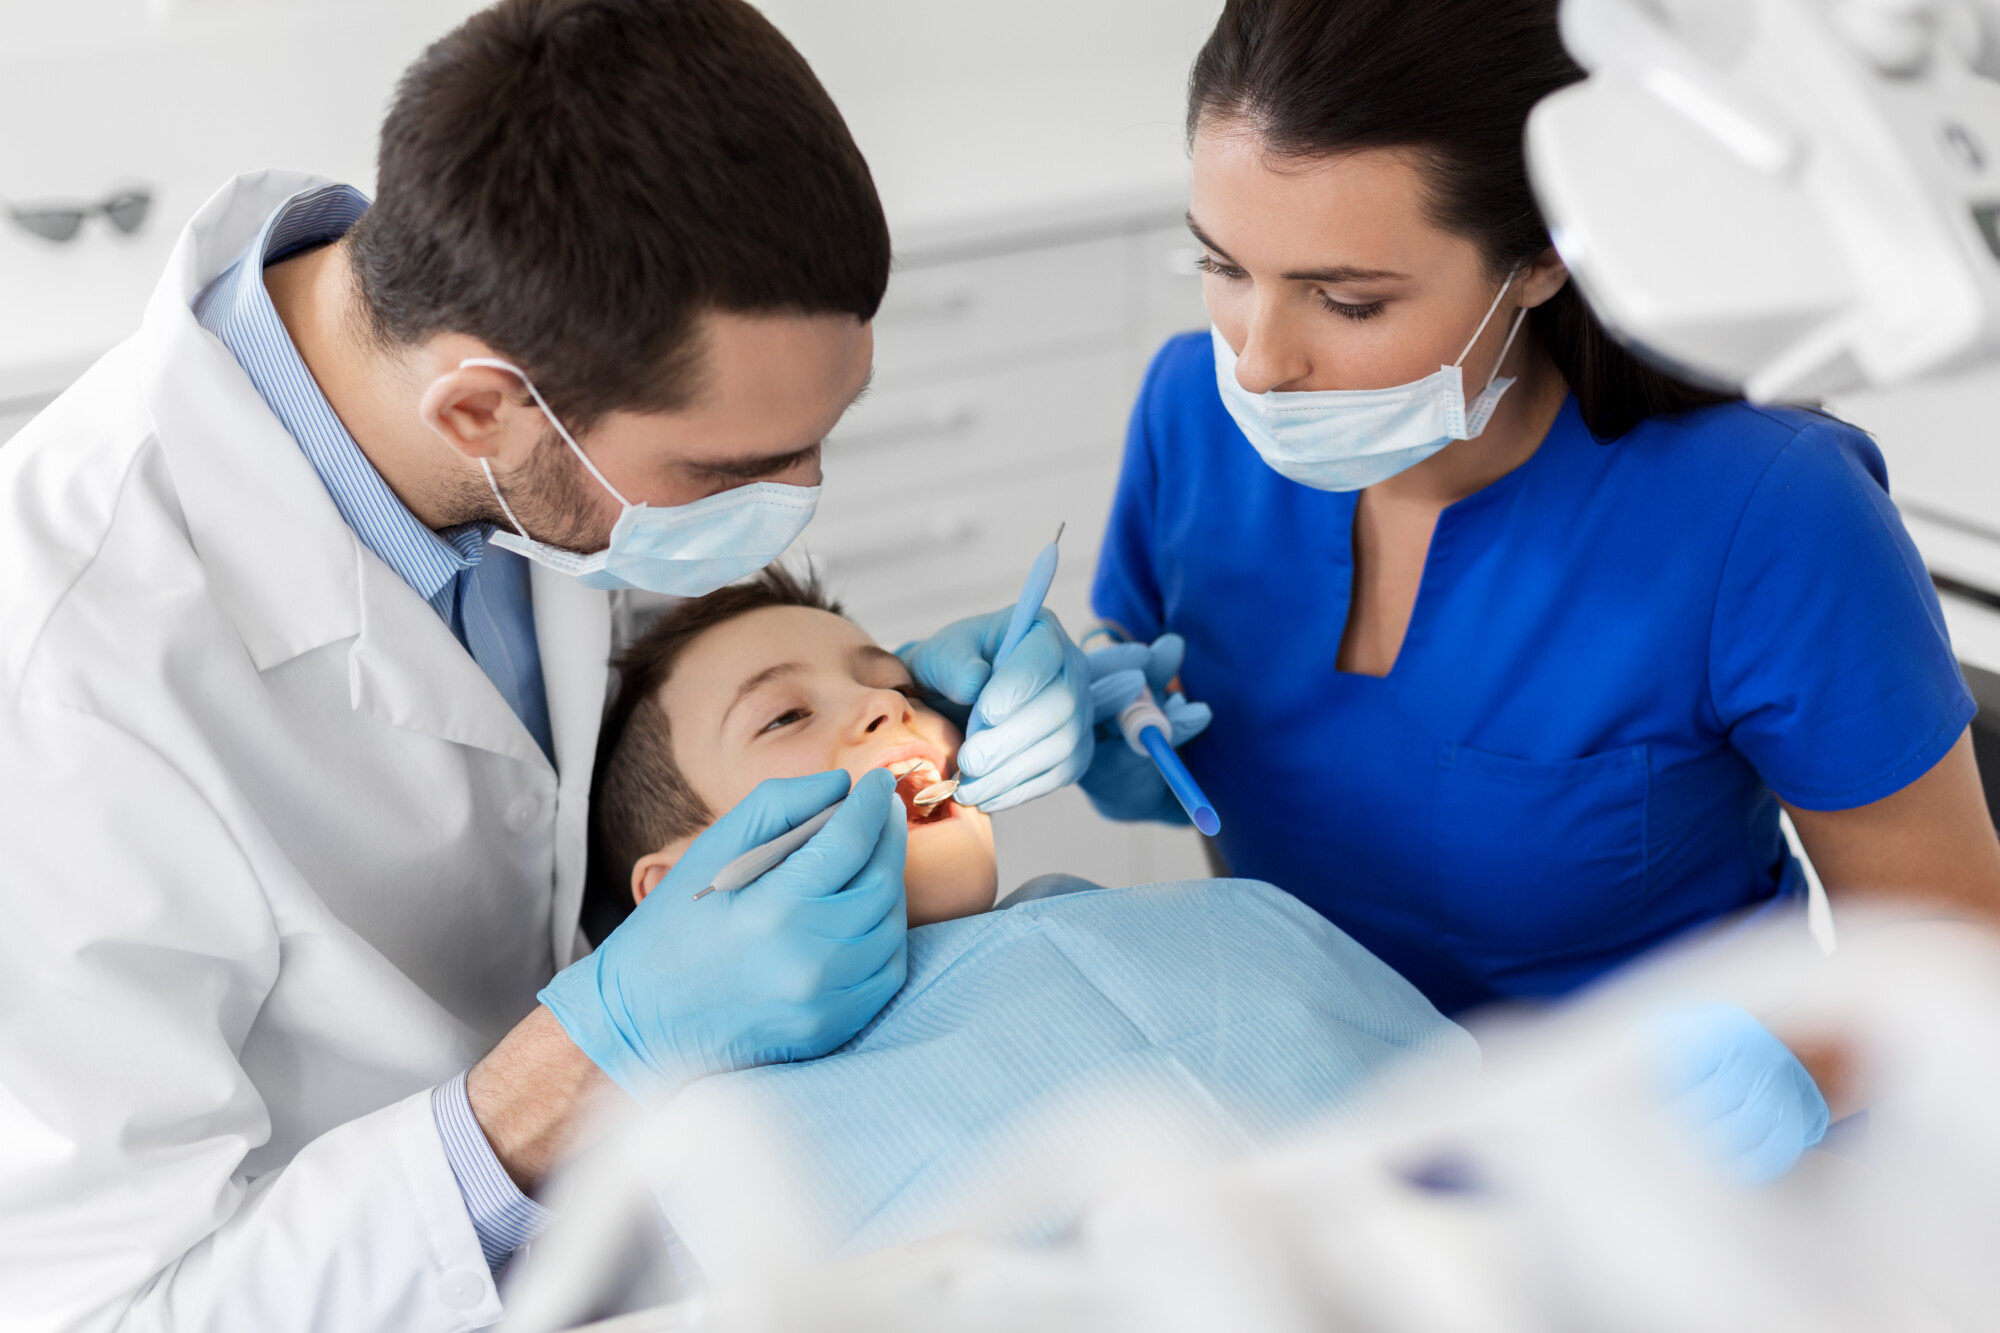 Are you searching for pediatric dentist services for your family? Here's a brief outline of the various available services.